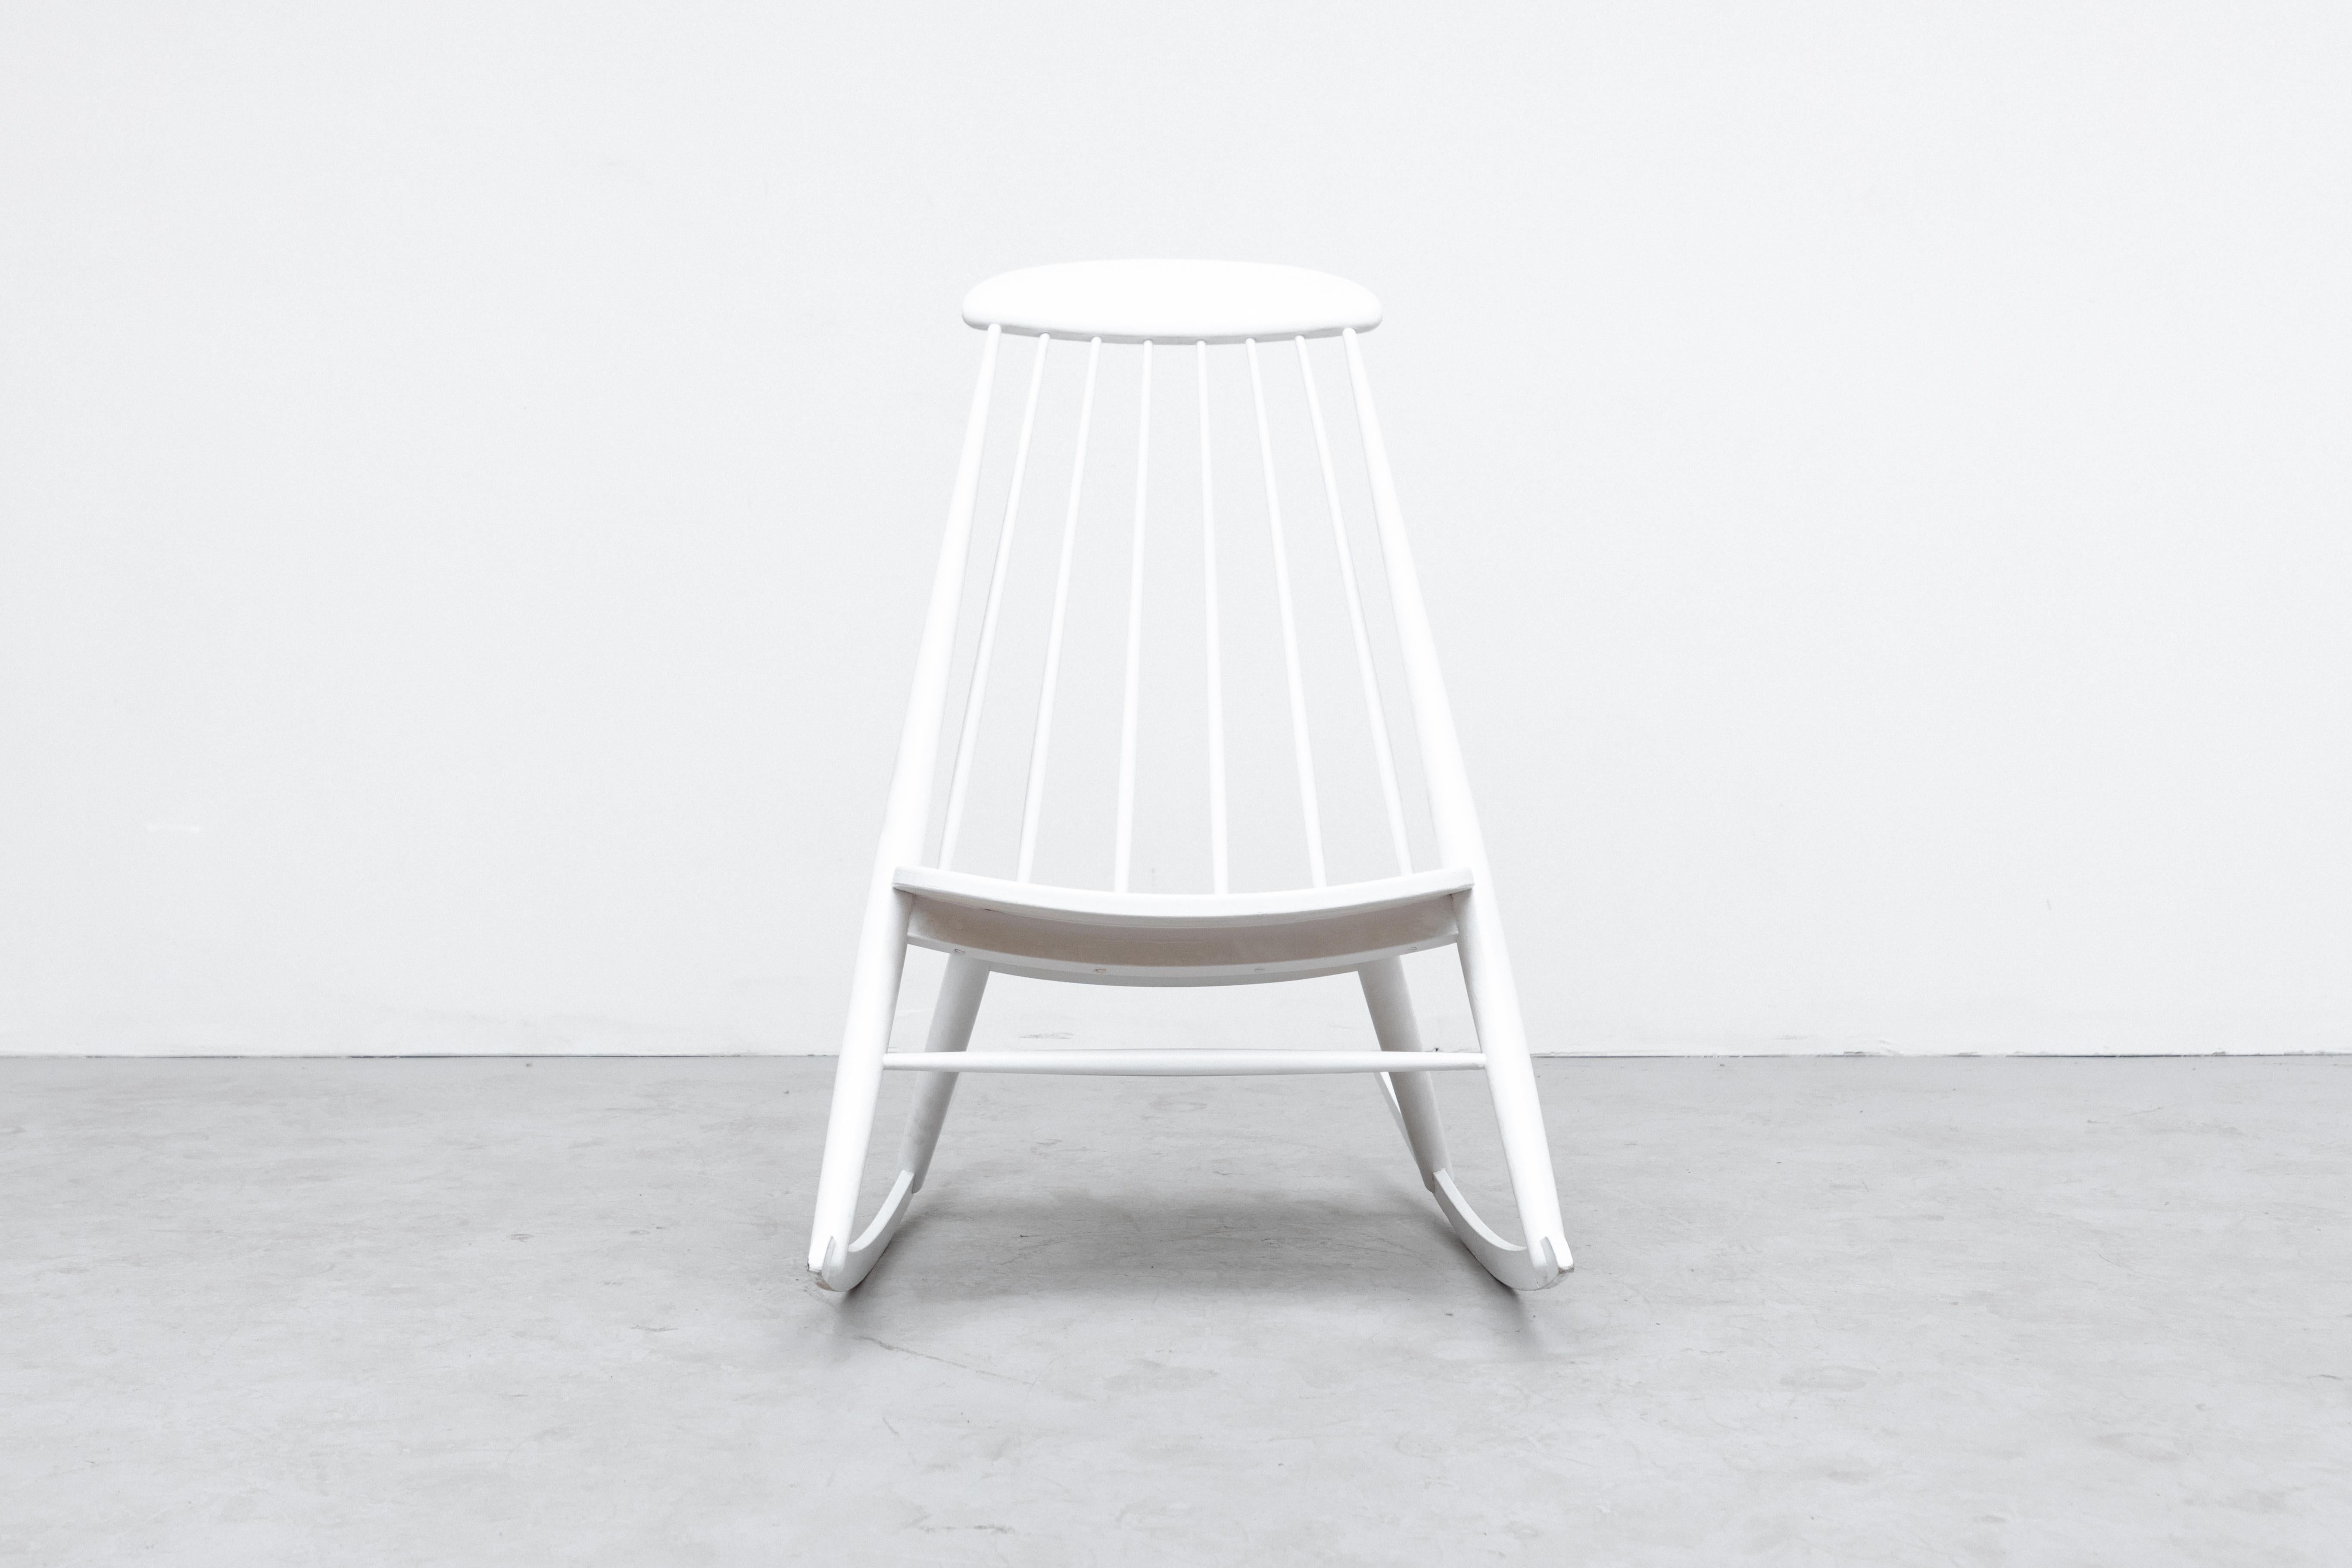 Beautiful Ilmari Tapiovaara (attr) white lacquered wood rocking chair in impressive overall condition with light wear consistent with age and use. Other rocking chairs also available listed separately (LU922410239773, LU922413492382).